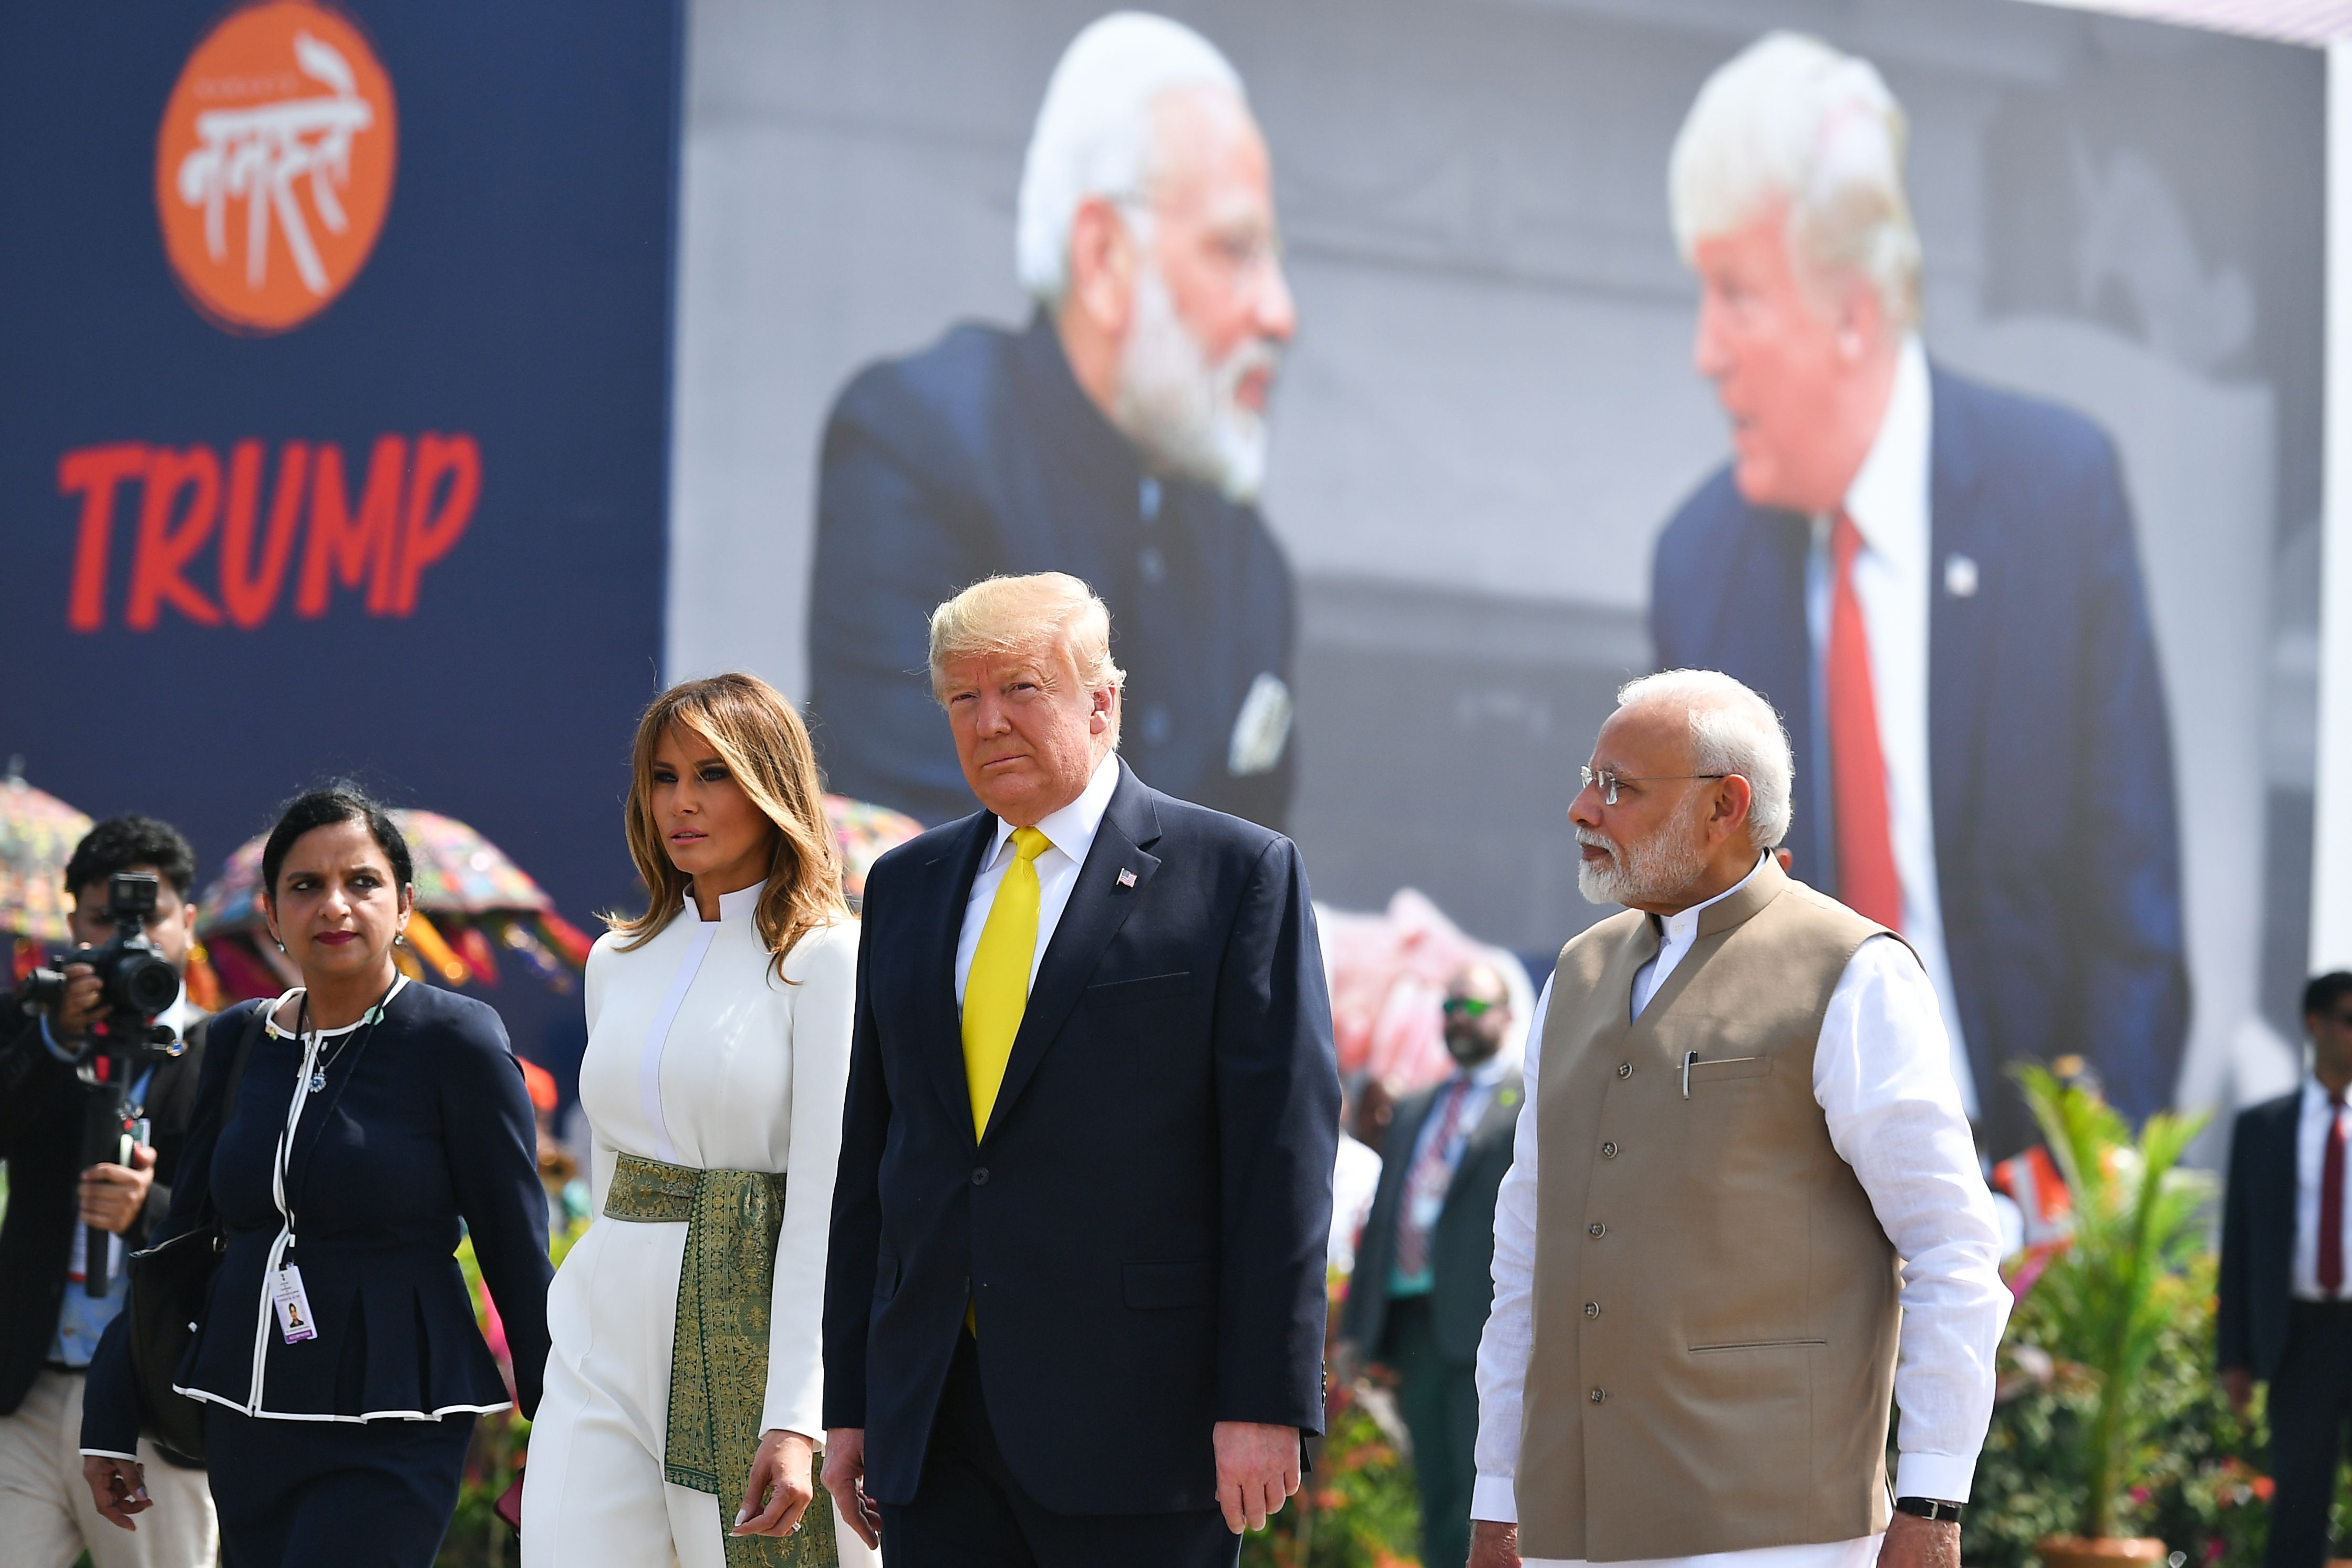 India's Prime Minister Narendra Modi (R) greets US President Donald Trump (C) and First Lady Melania Trump (2L) upon their arrival 